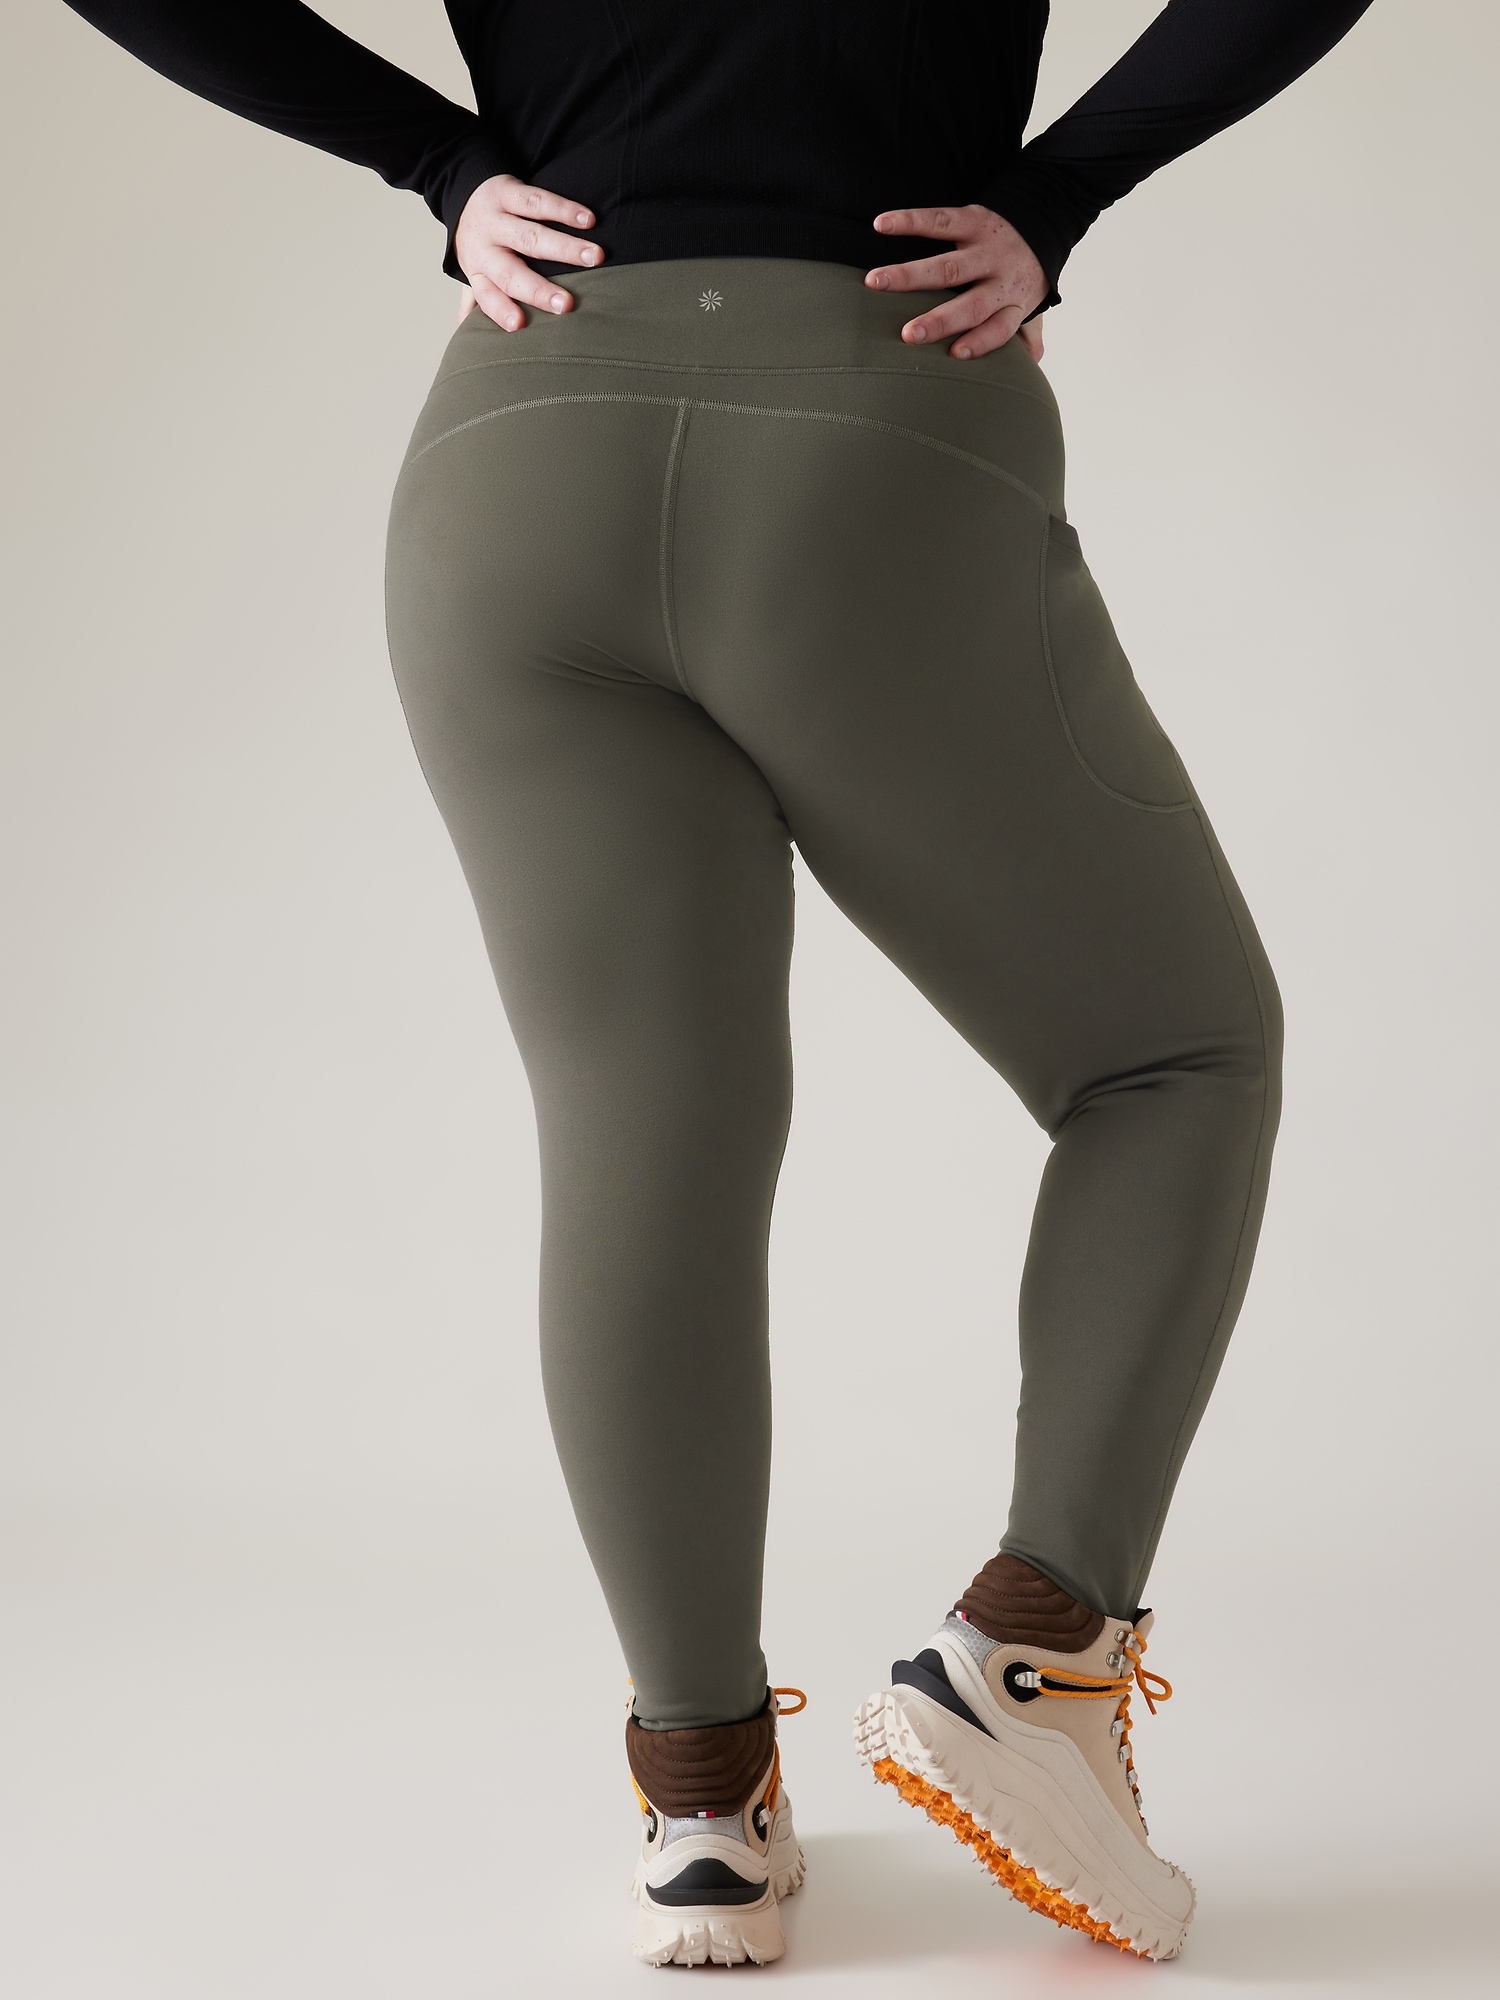 Rit dye on fast and free leggings. From Grey to Navy! : r/lululemon